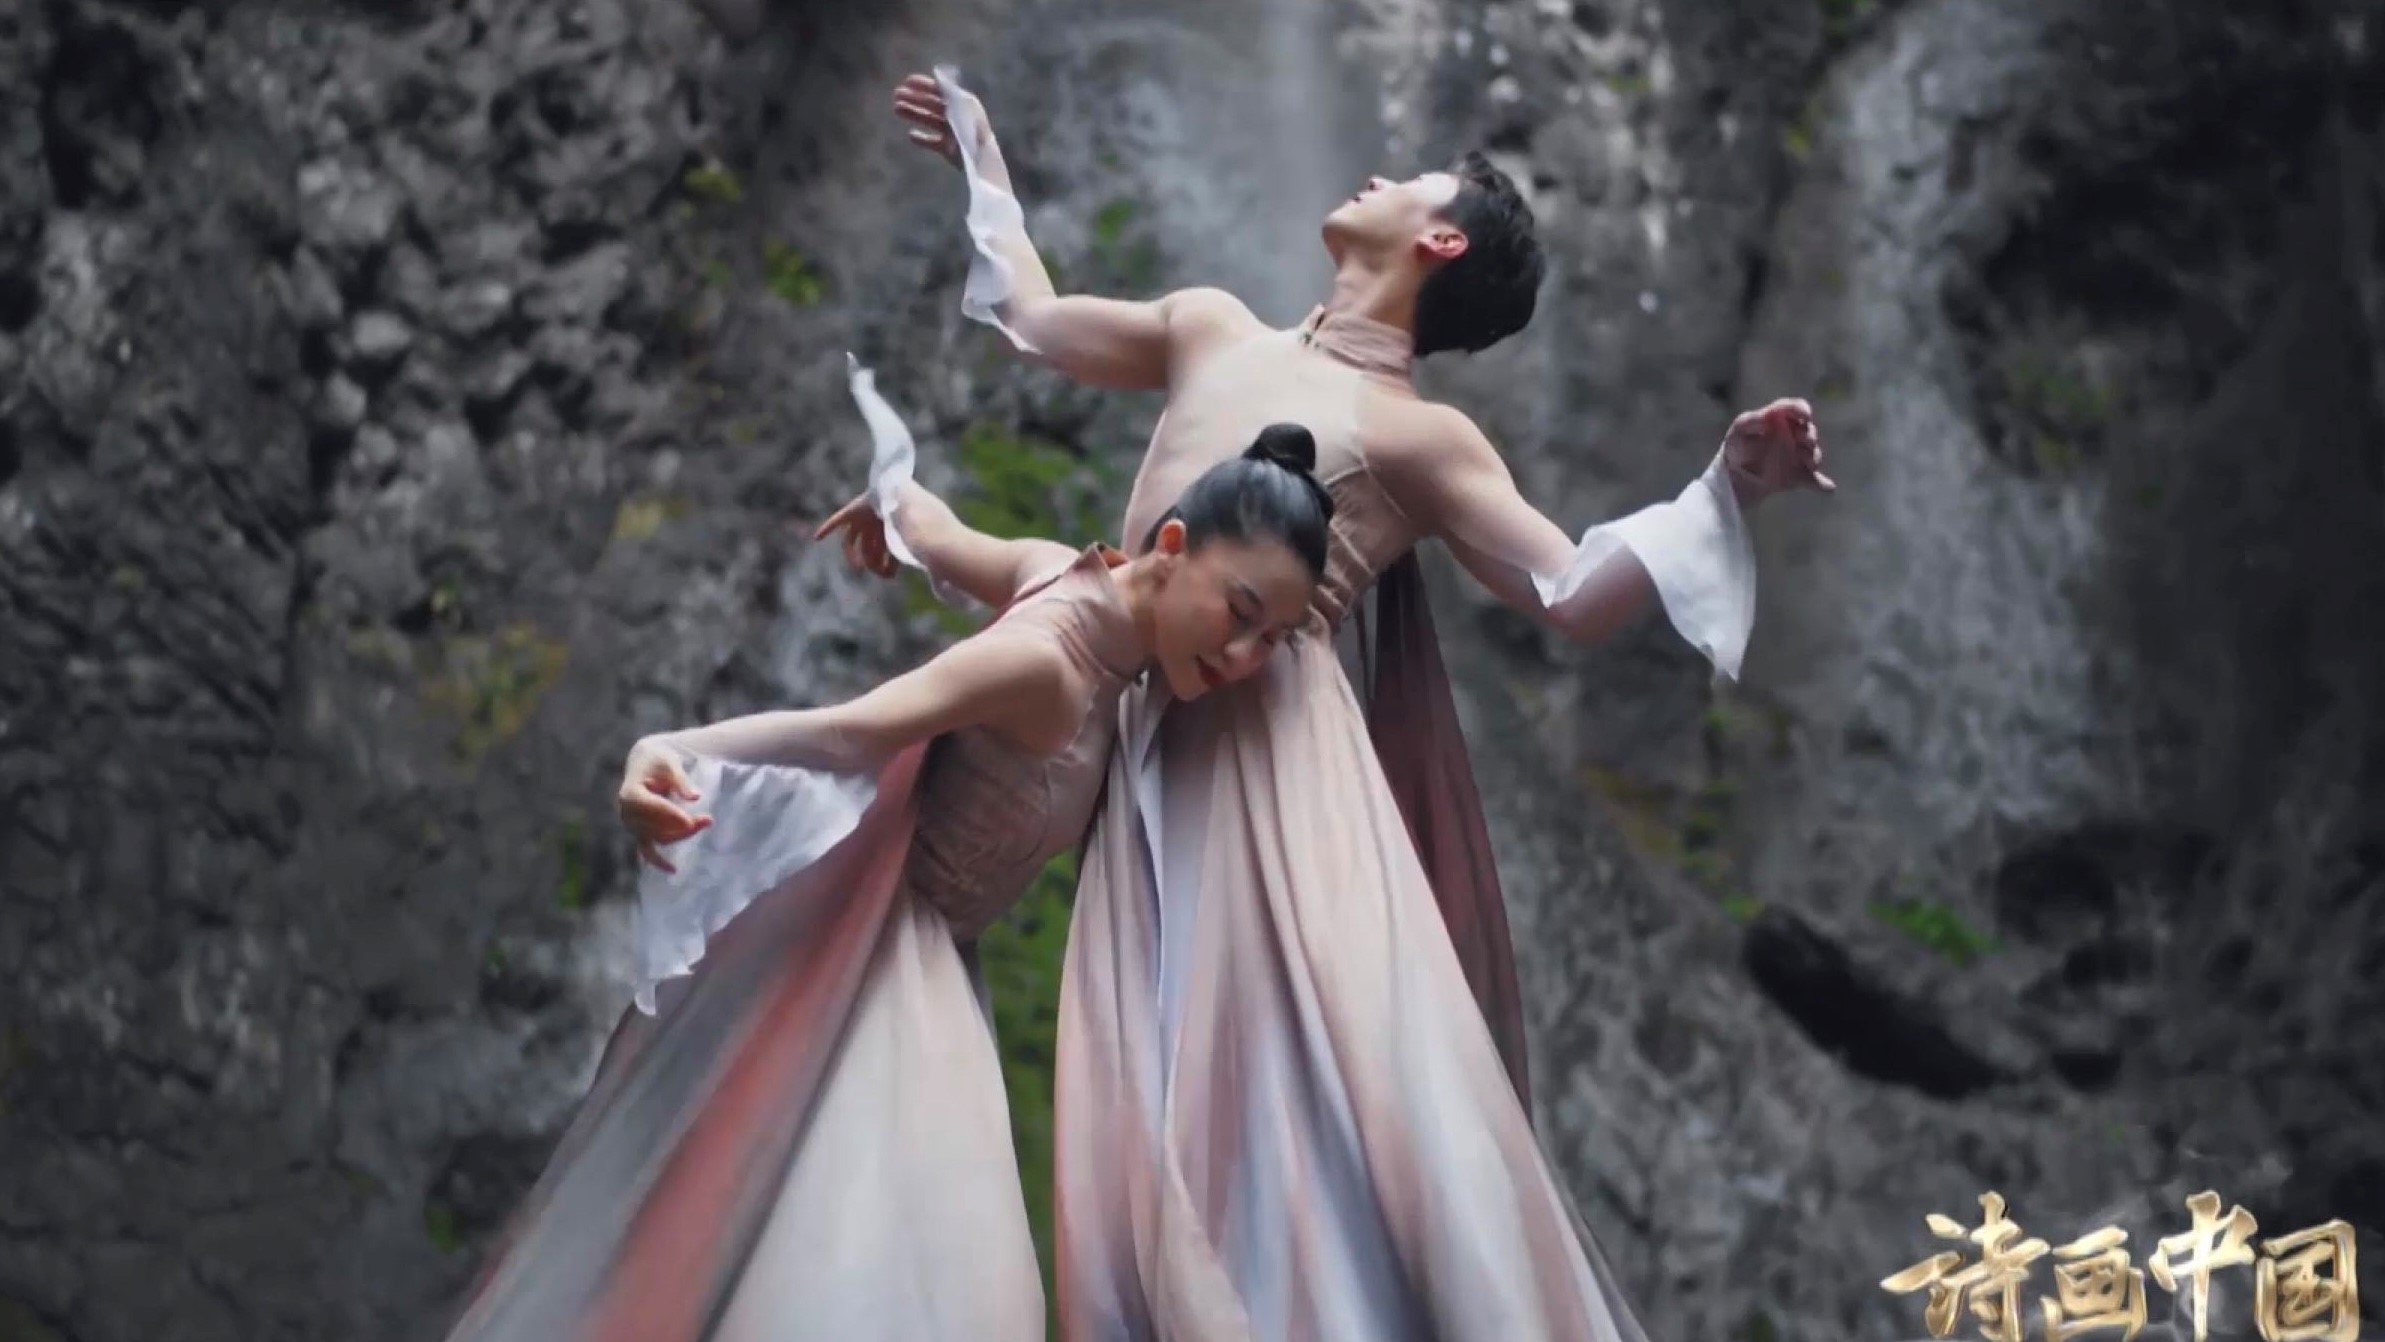 Zhu Han and his partner dance at the bottom of a ravine. /CGTN